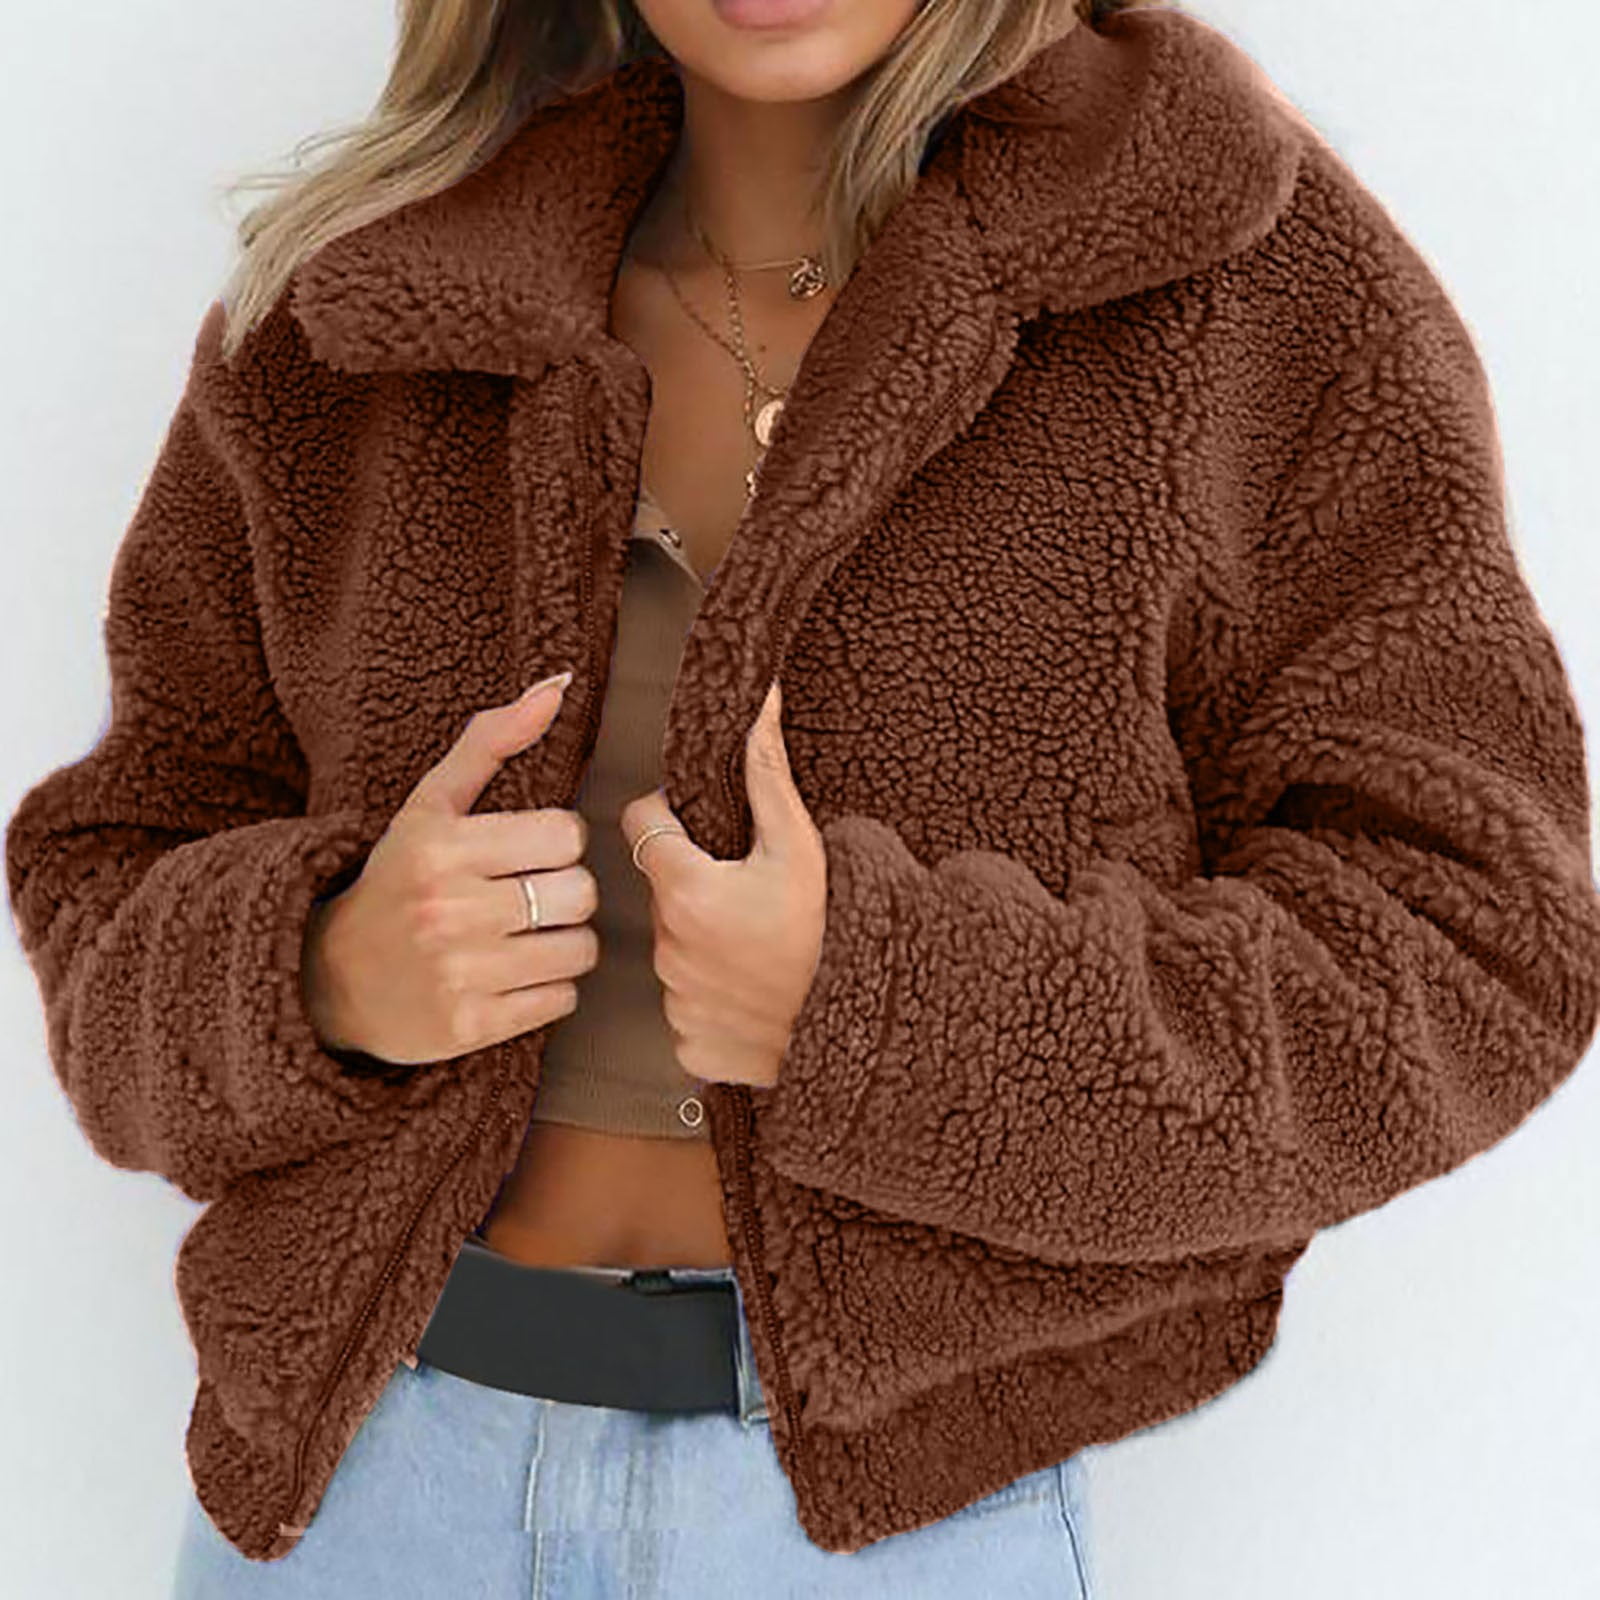 SHAOBGE Same Day Delivery Items Prime Coat For Women Fleece Zip Up Jacket  Cropped Sherpa Jacket Teddy Bear Sweater For Women Long Jackets Sweater  Jackets For Women With Pockets Black of Friday